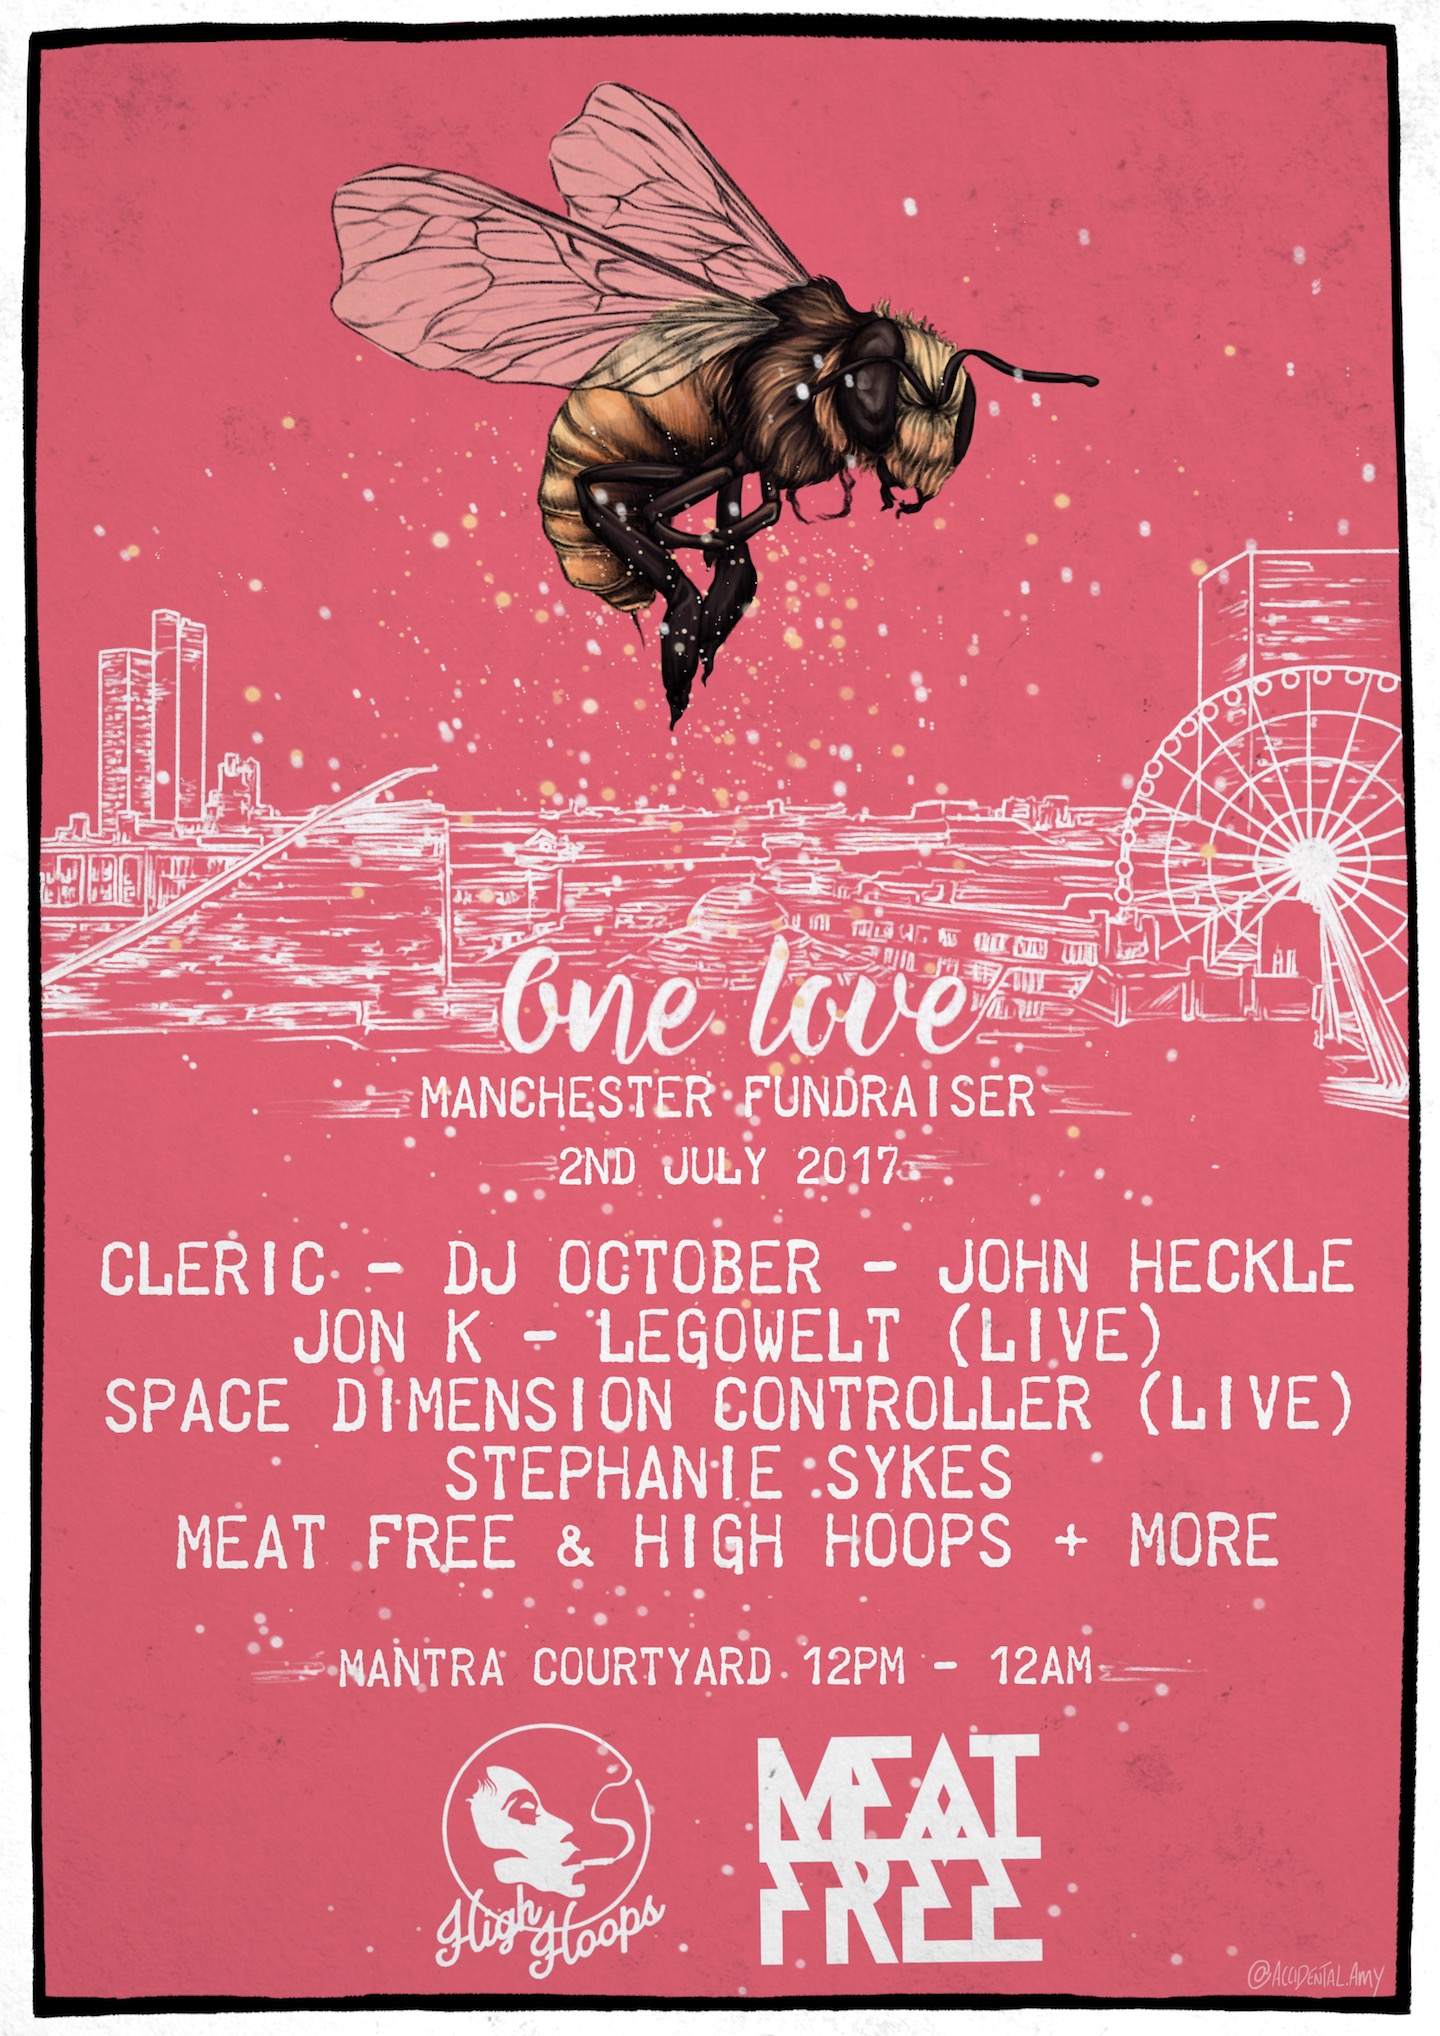 Legowelt, Space Dimension Controller play One Love fundraiser in Manchester image